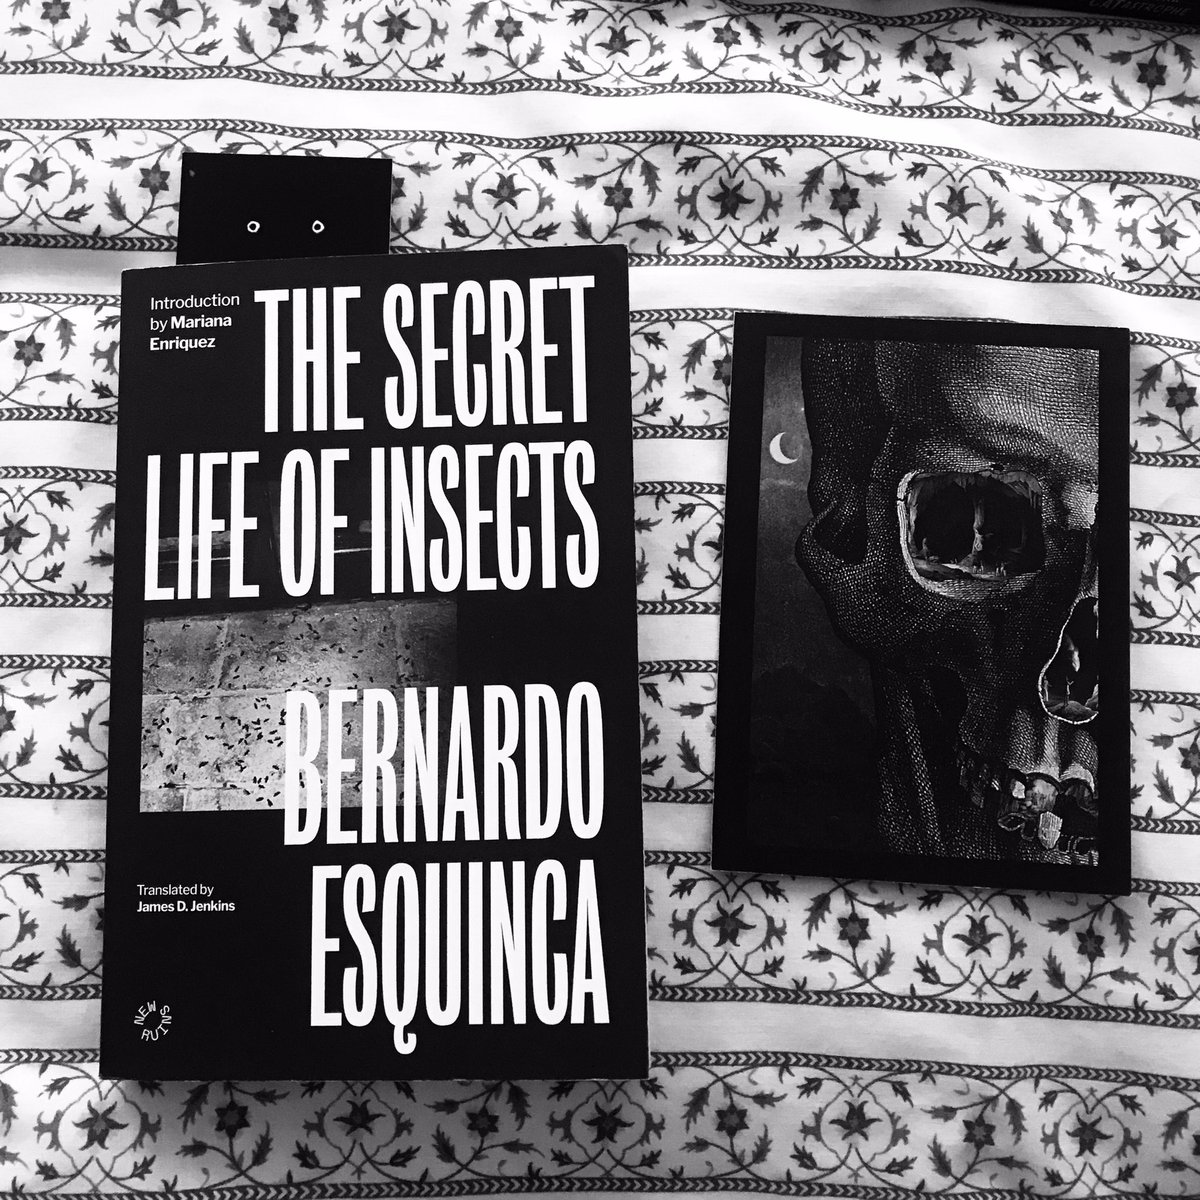 Now That’s What I Call Book Post! Out today, THE SECRET LIFE OF INSECTS by Shirley Jackson Awardee Bernardo Esquinca is an approachable creepy-crawly of a book: literary horror without being too harrowing. Complete w/ awesome artwork by Luis P. Ochando. Gracias @DeadInkBooks